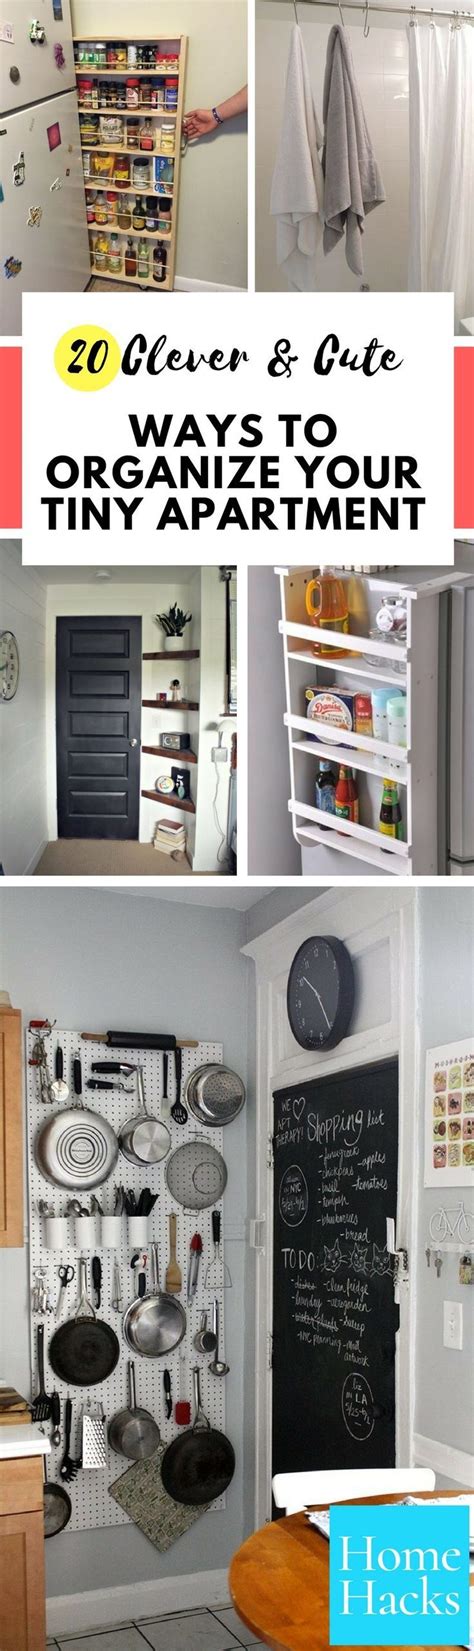 20 Super Clever And Cute Ways To Organize Your Tiny Apartment